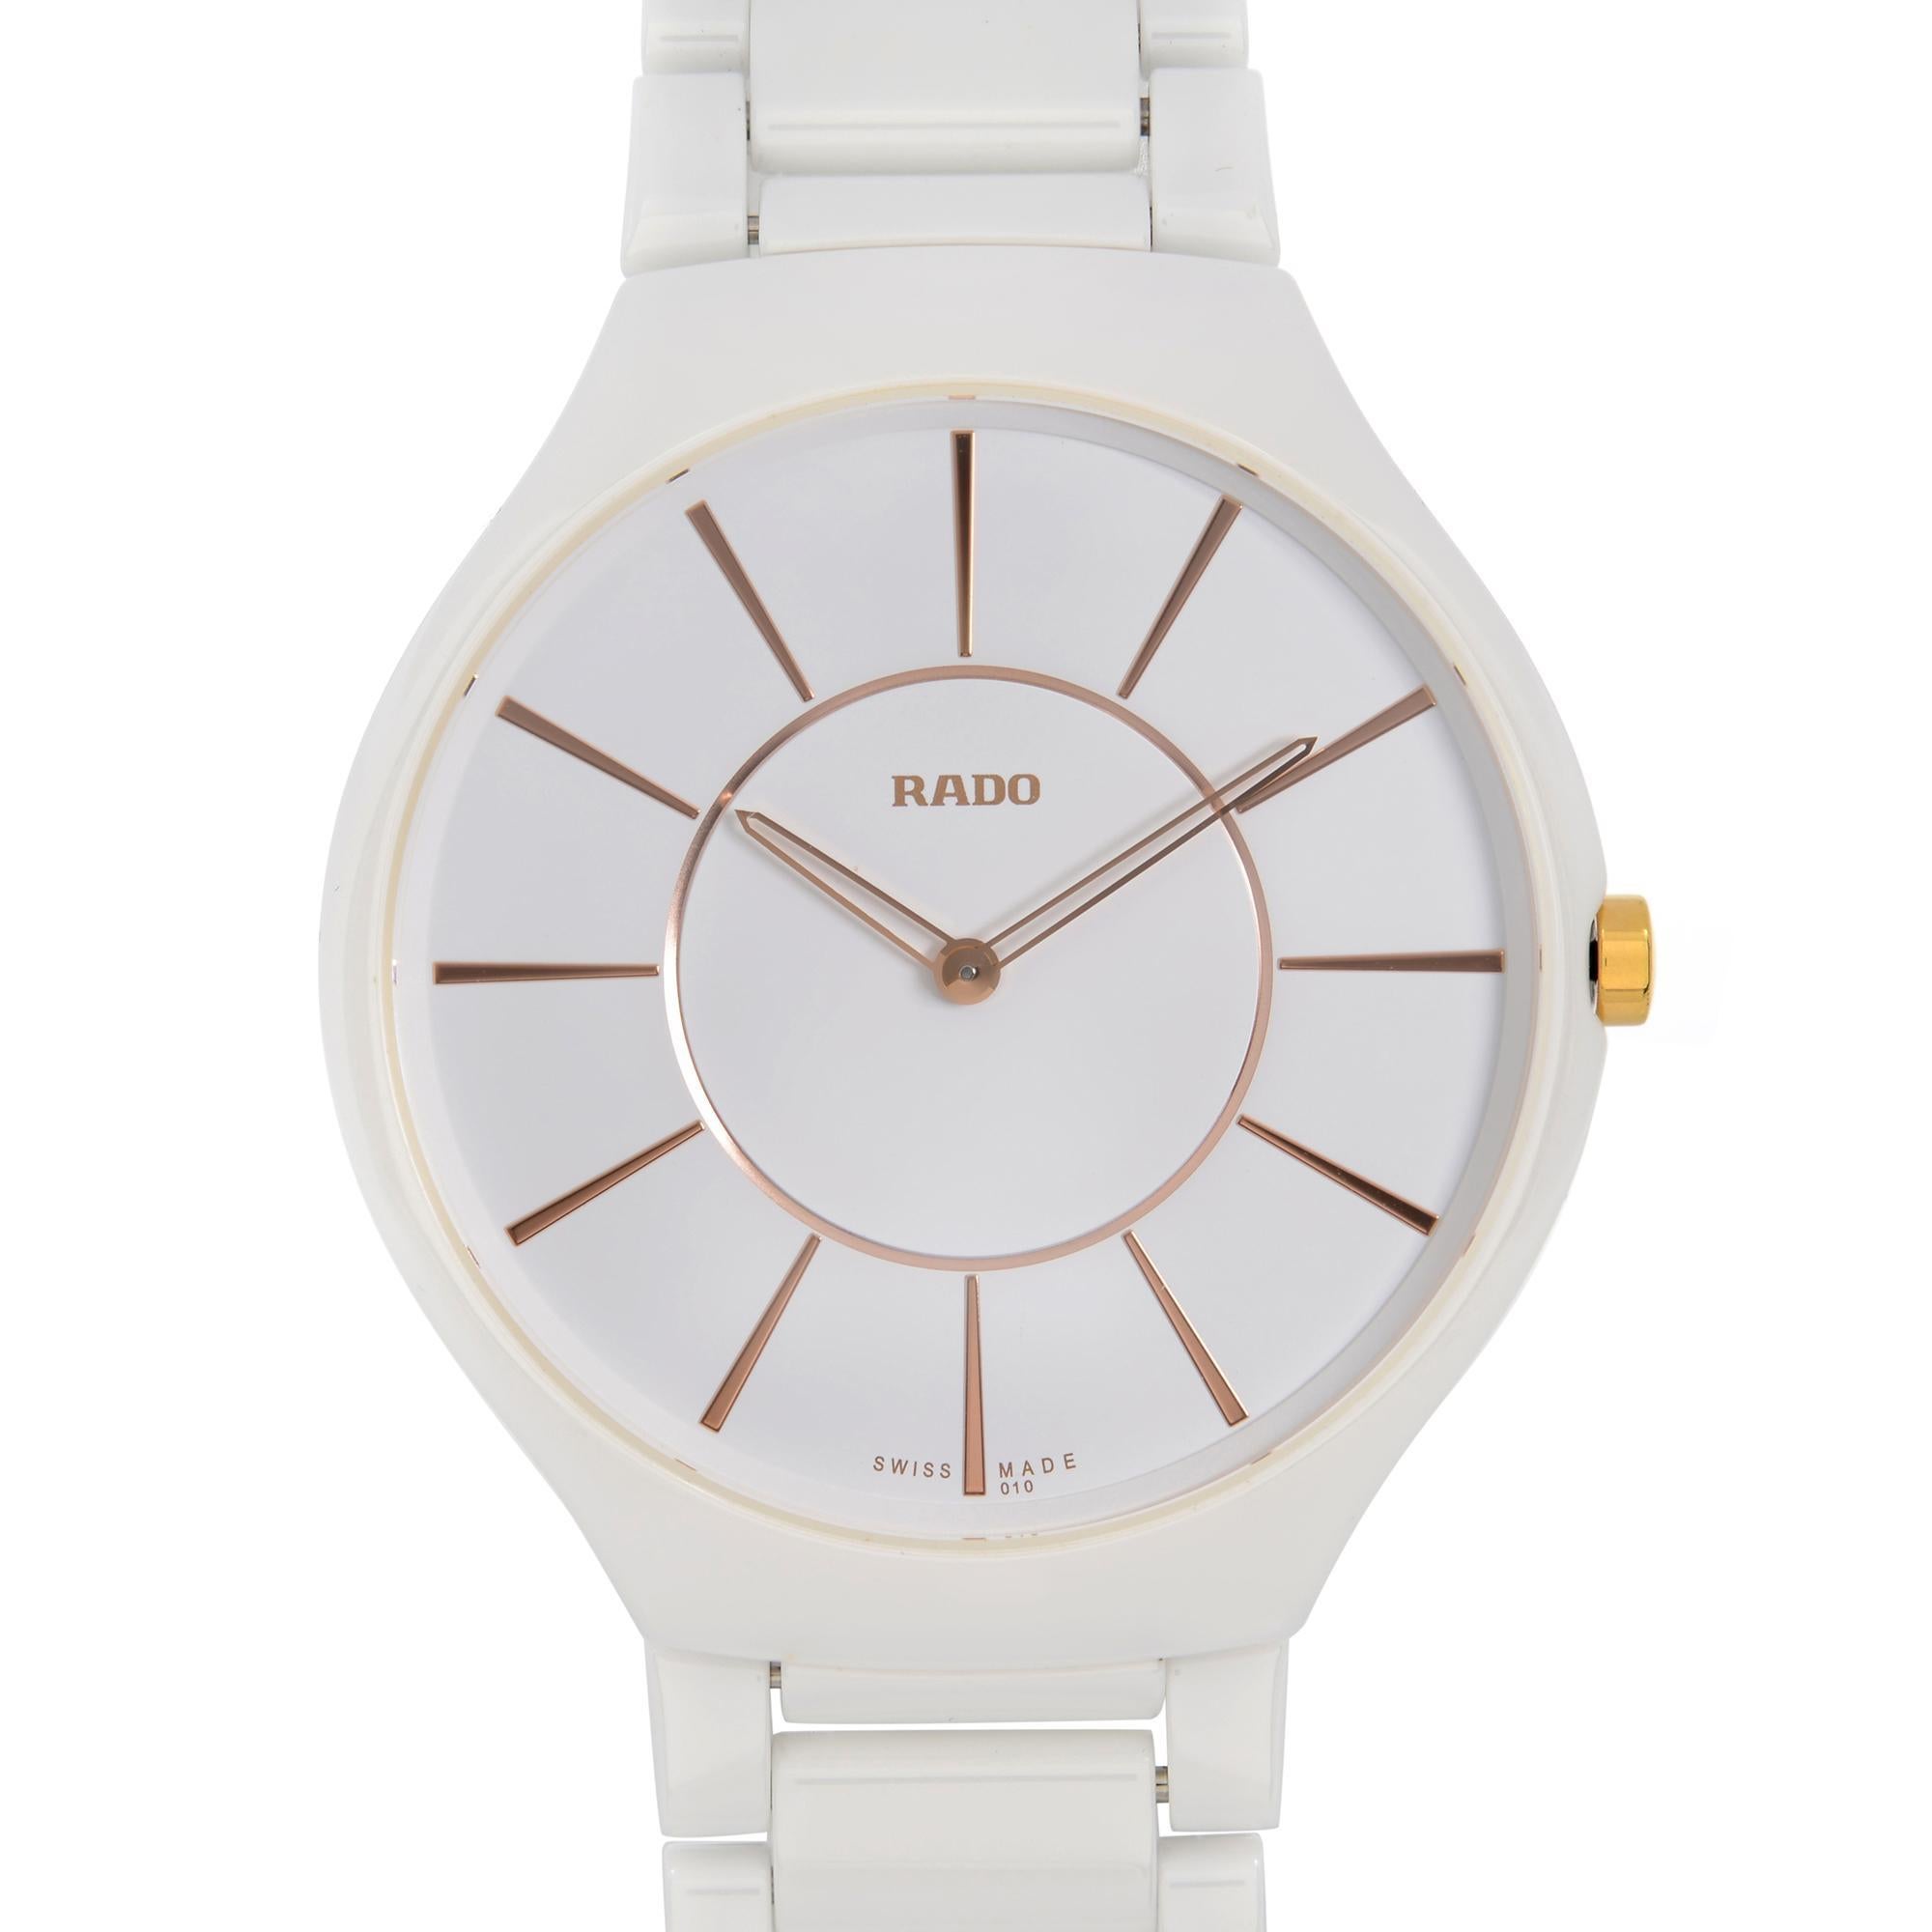 Display Model Rado True Thinline 39mm High-Tech Ceramic White Dial Ladies Watch R27957102. This Ladies Timepiece is Powered by a Quartz (Battery) Movement and Features: White Ceramic Case and Bracelet, Fixed White Ceramic Bezel, White Dial with Rose